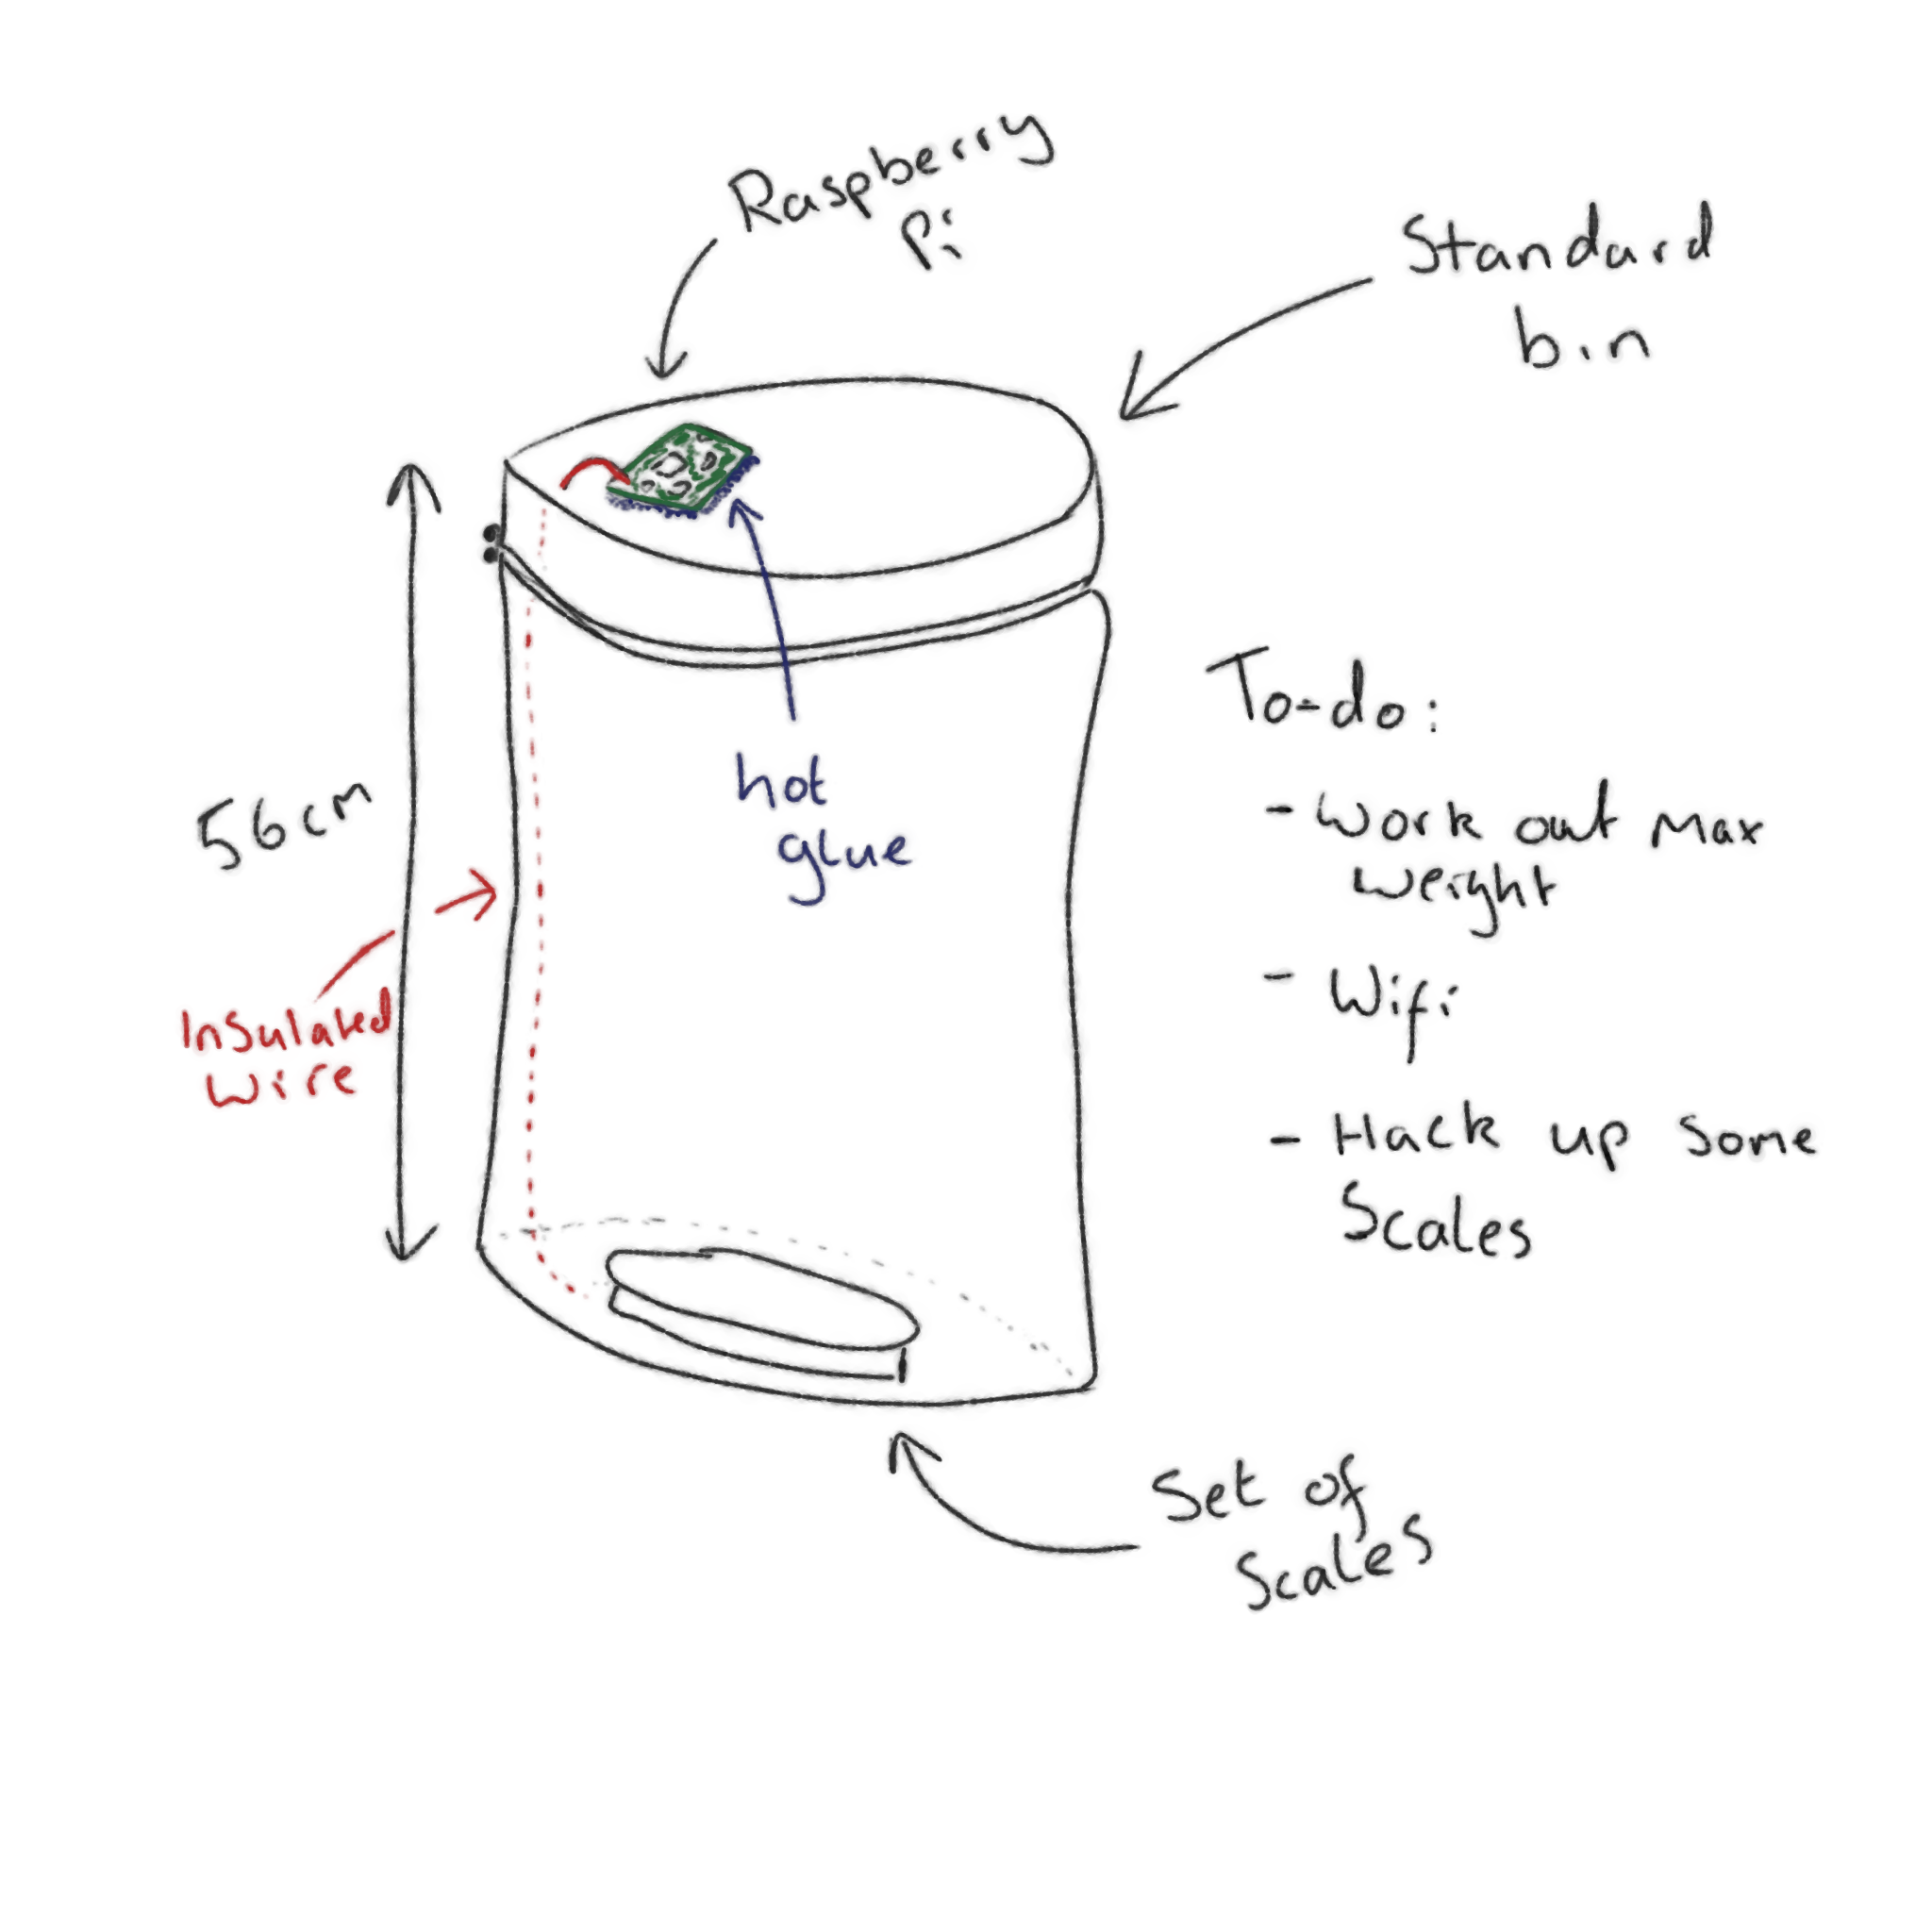 Idea 1, a bin with scales